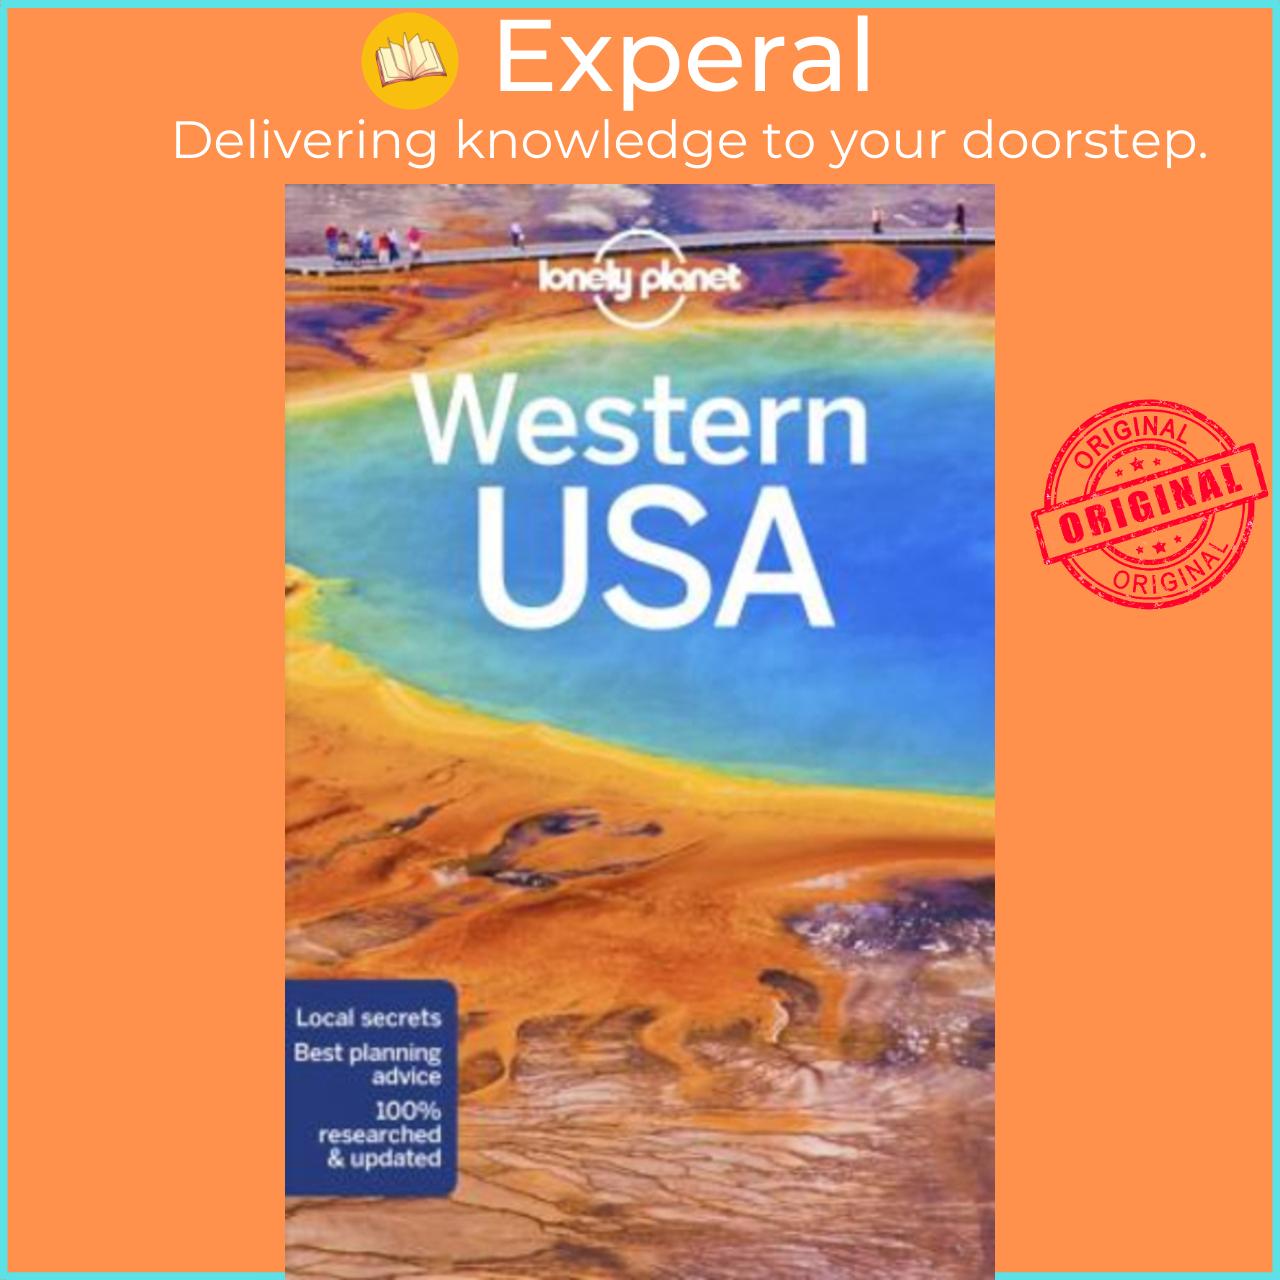 Mua Sách - Lonely Planet Western USA by Lonely Planet (US edition,  paperback) tại Experal | Tiki